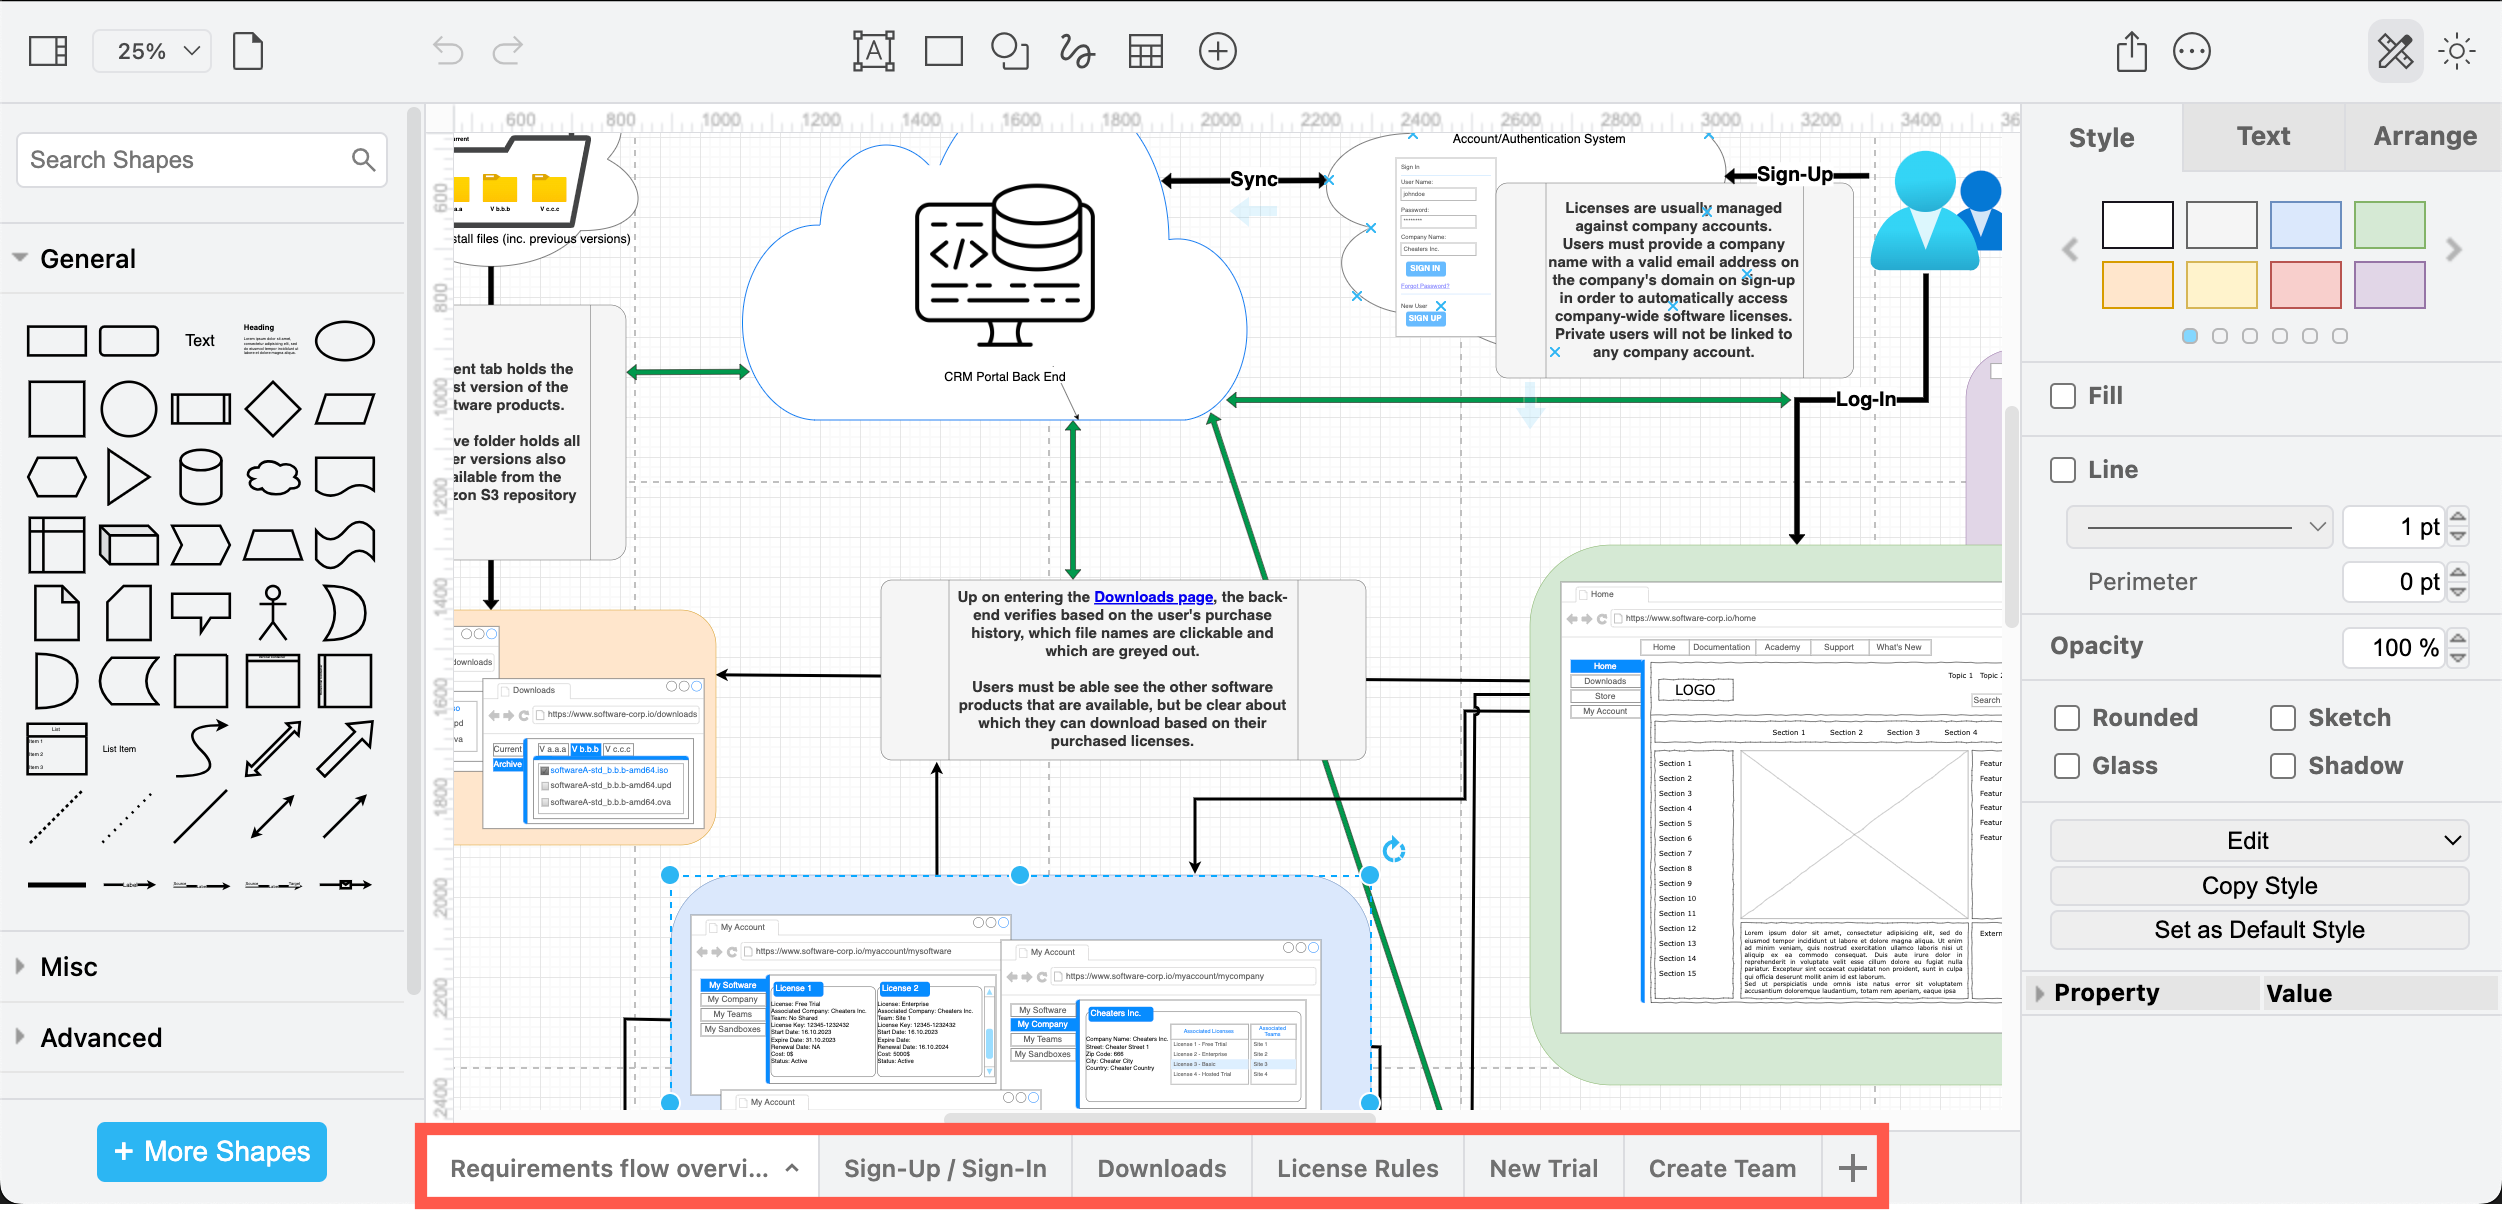 Multiple pages are ideal for large and complex diagrams - start with an overview on the first page